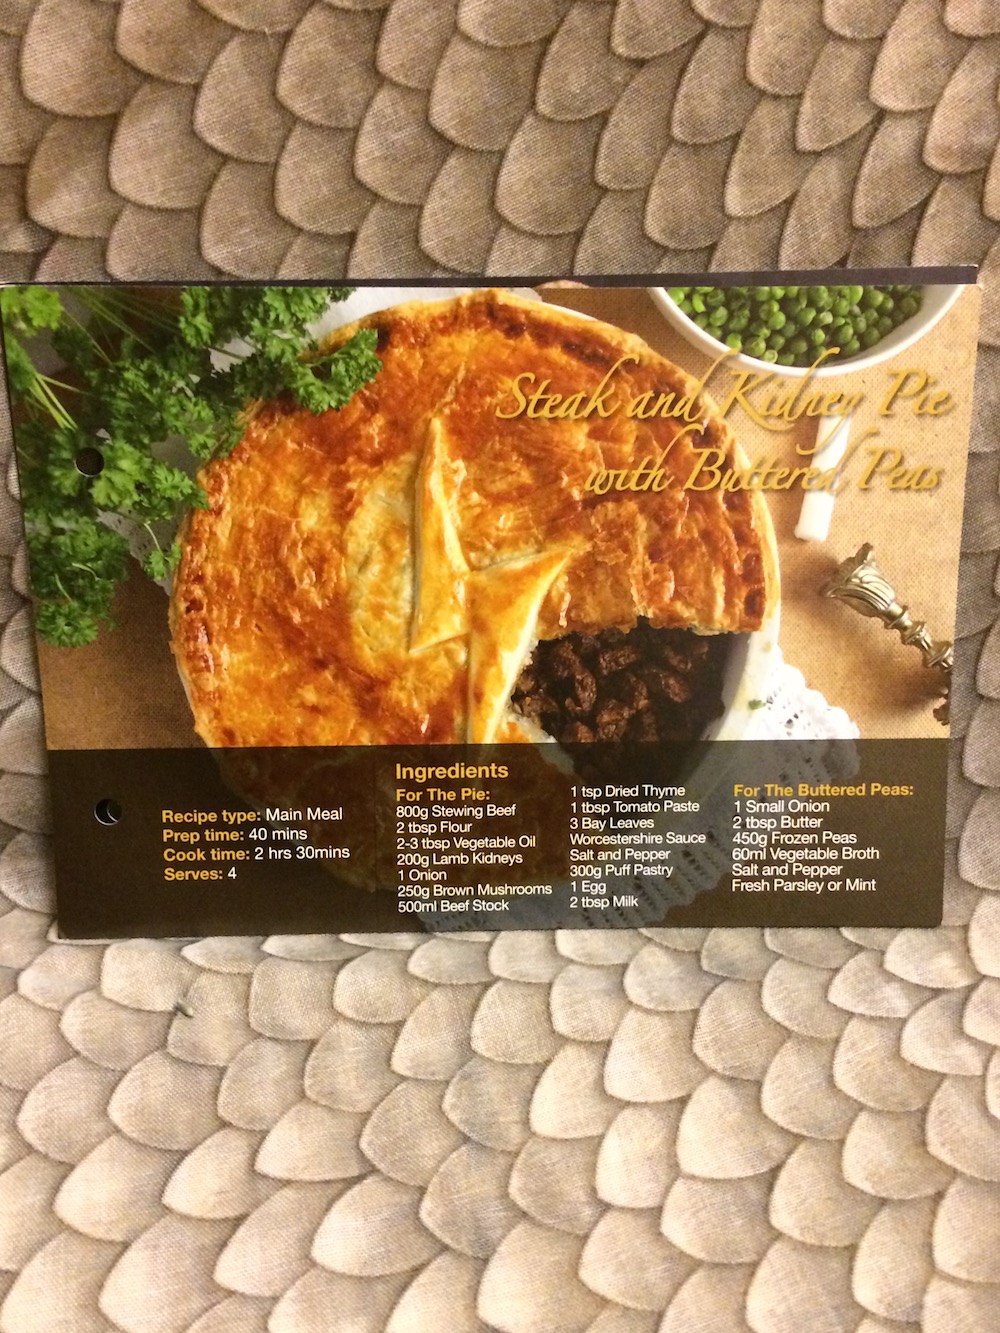 This recipe card gives instructions on how to make a steak and kidney pie, a British classic.